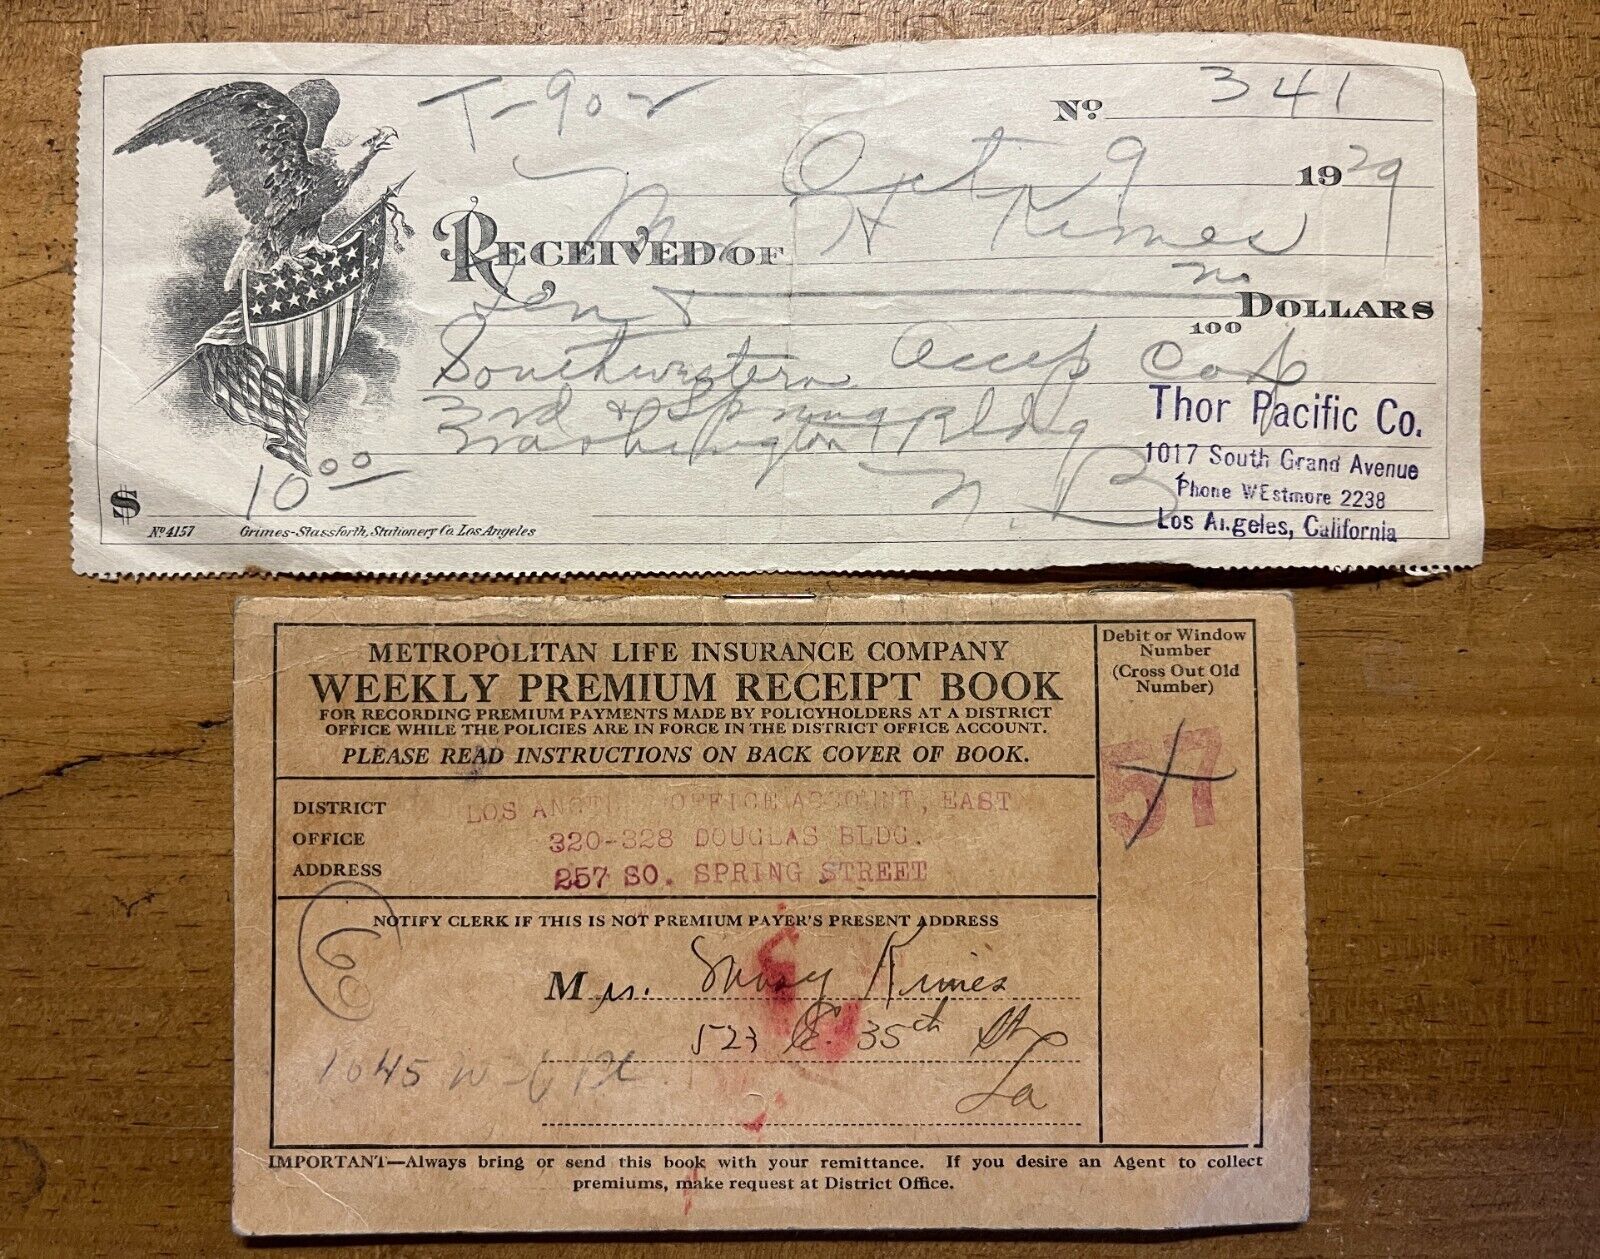 1929-36 Great Depression Era Documents--Receipt and Life Insurance (Kimes)